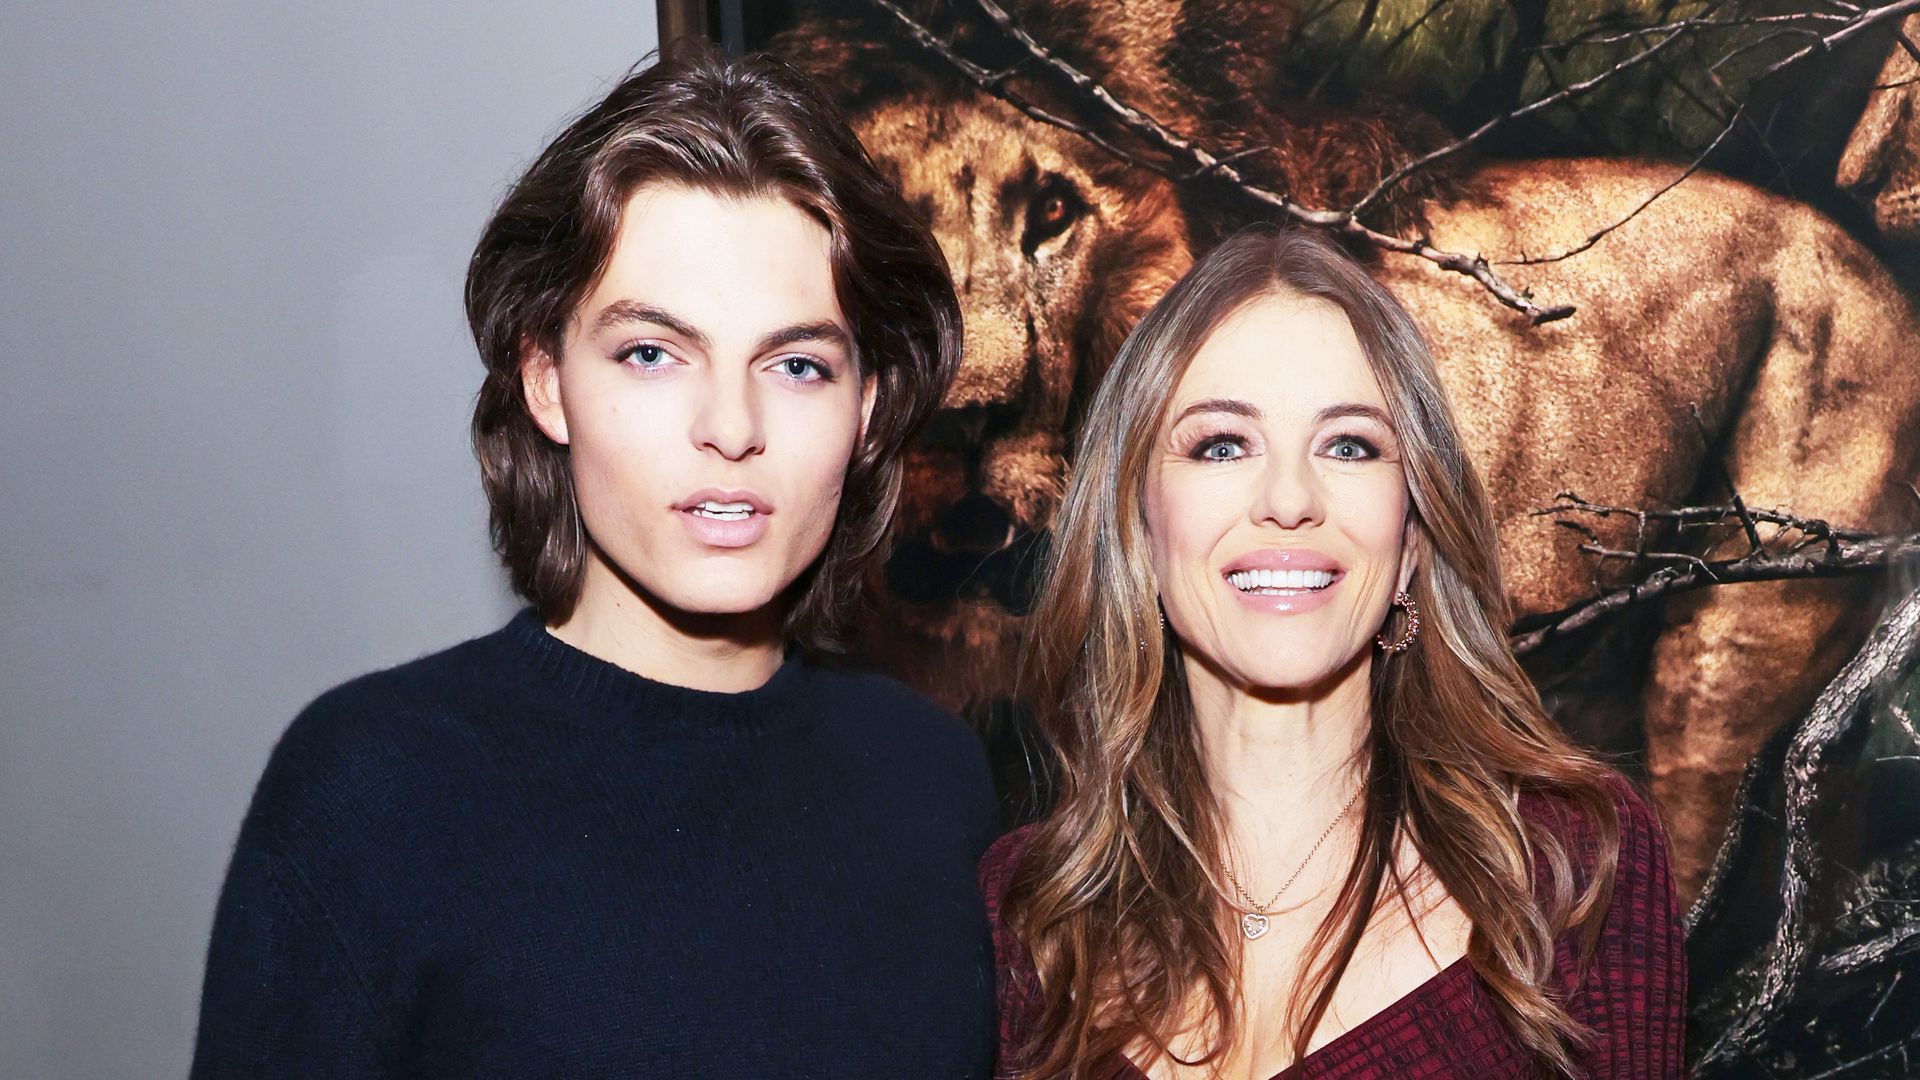 Elizabeth Hurley and her lookalike son Damian reveal they share each ...